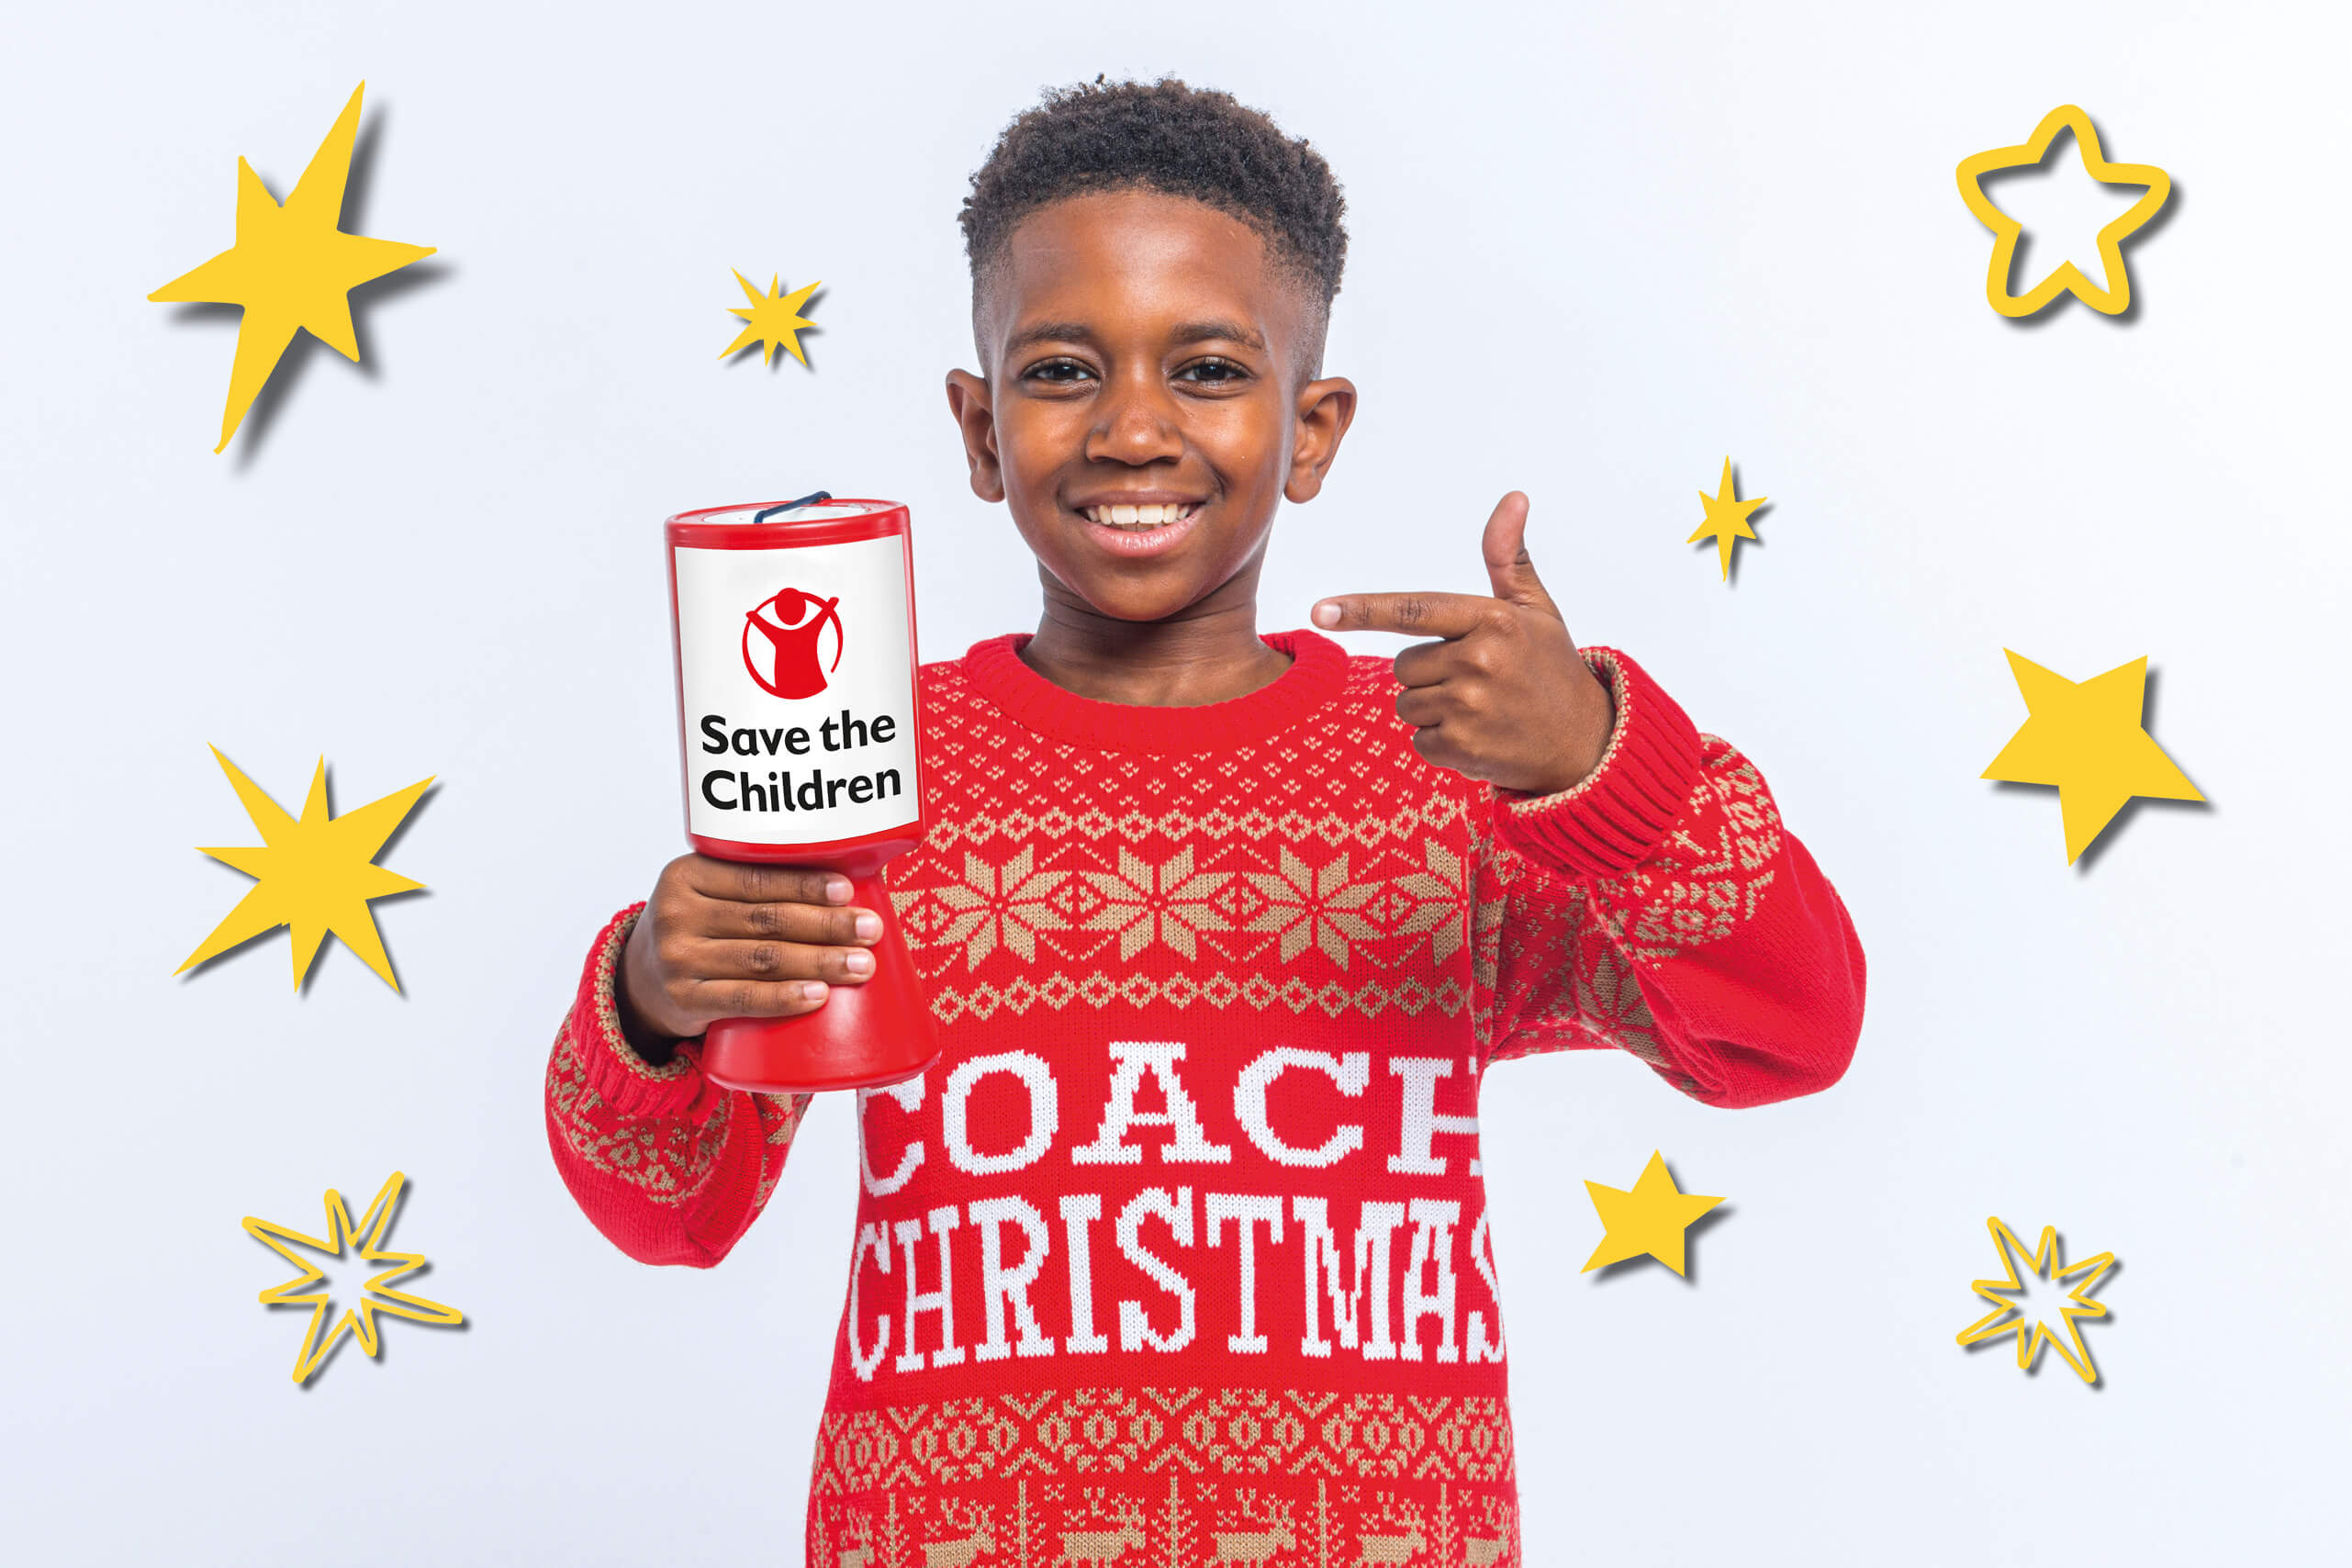 About Christmas Jumper Day 2021 | Save the Children